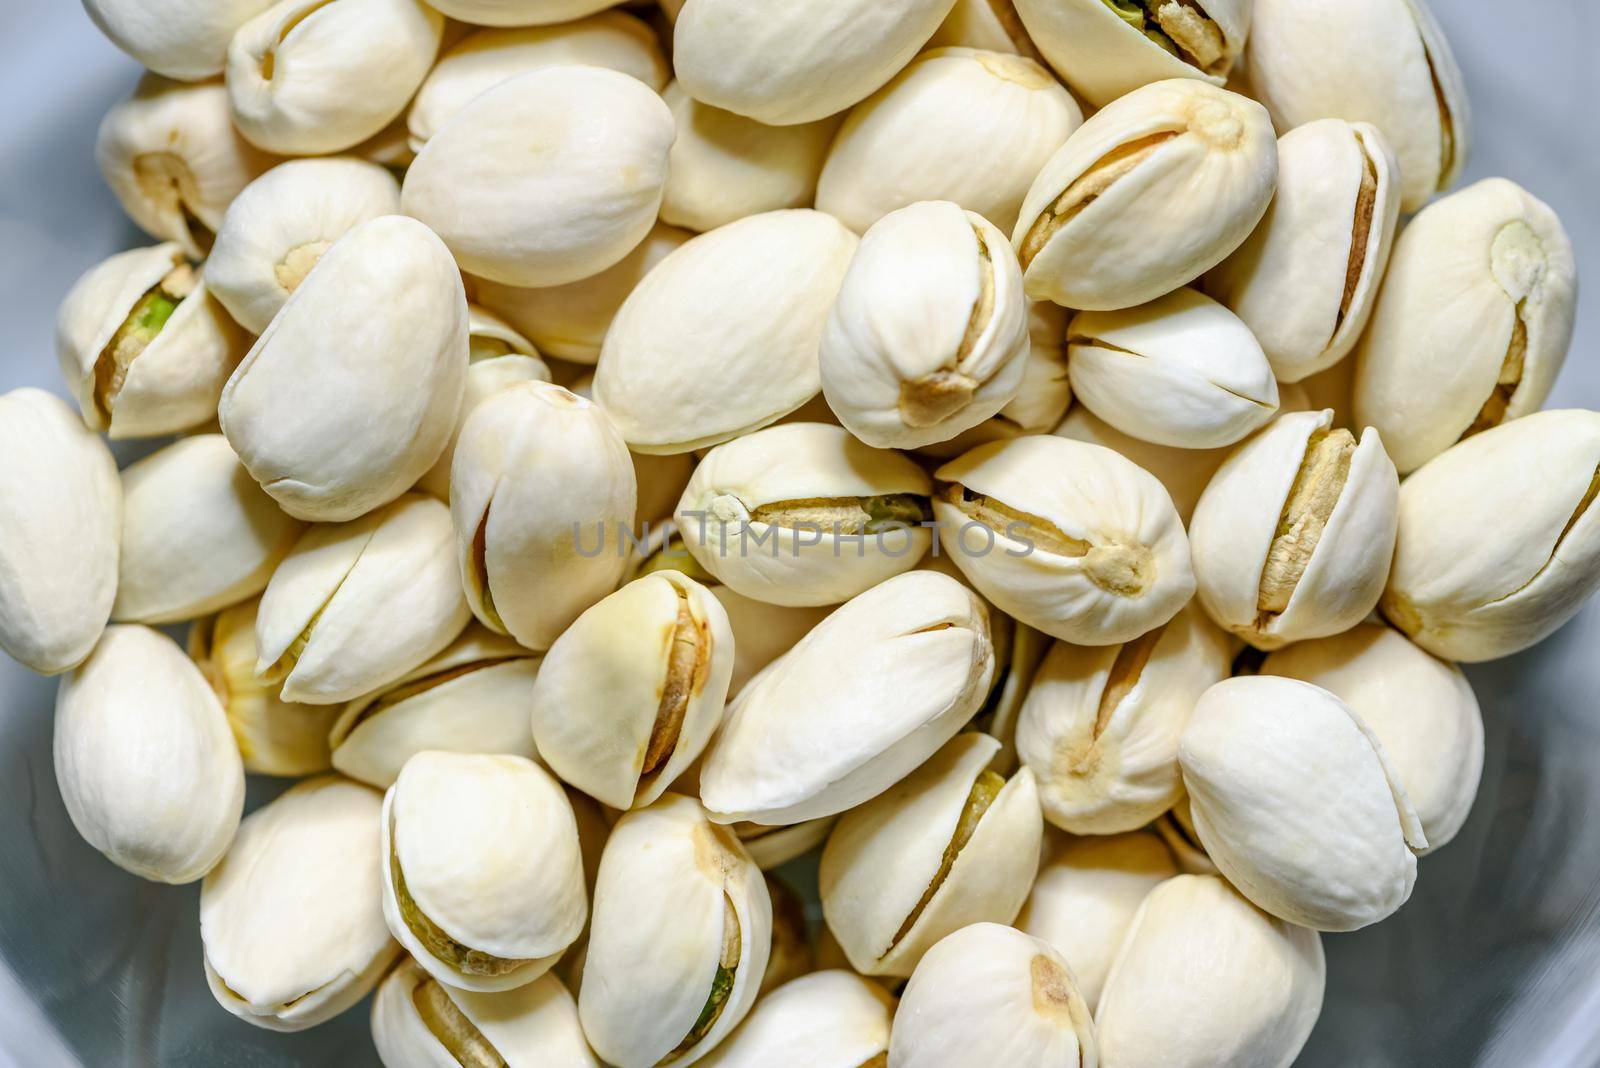 Close-up top view a pile of beans it has a white nut shell dry and hard of Pistachio, Pistache or Pistacia vera in a bowl food delicious salty snack